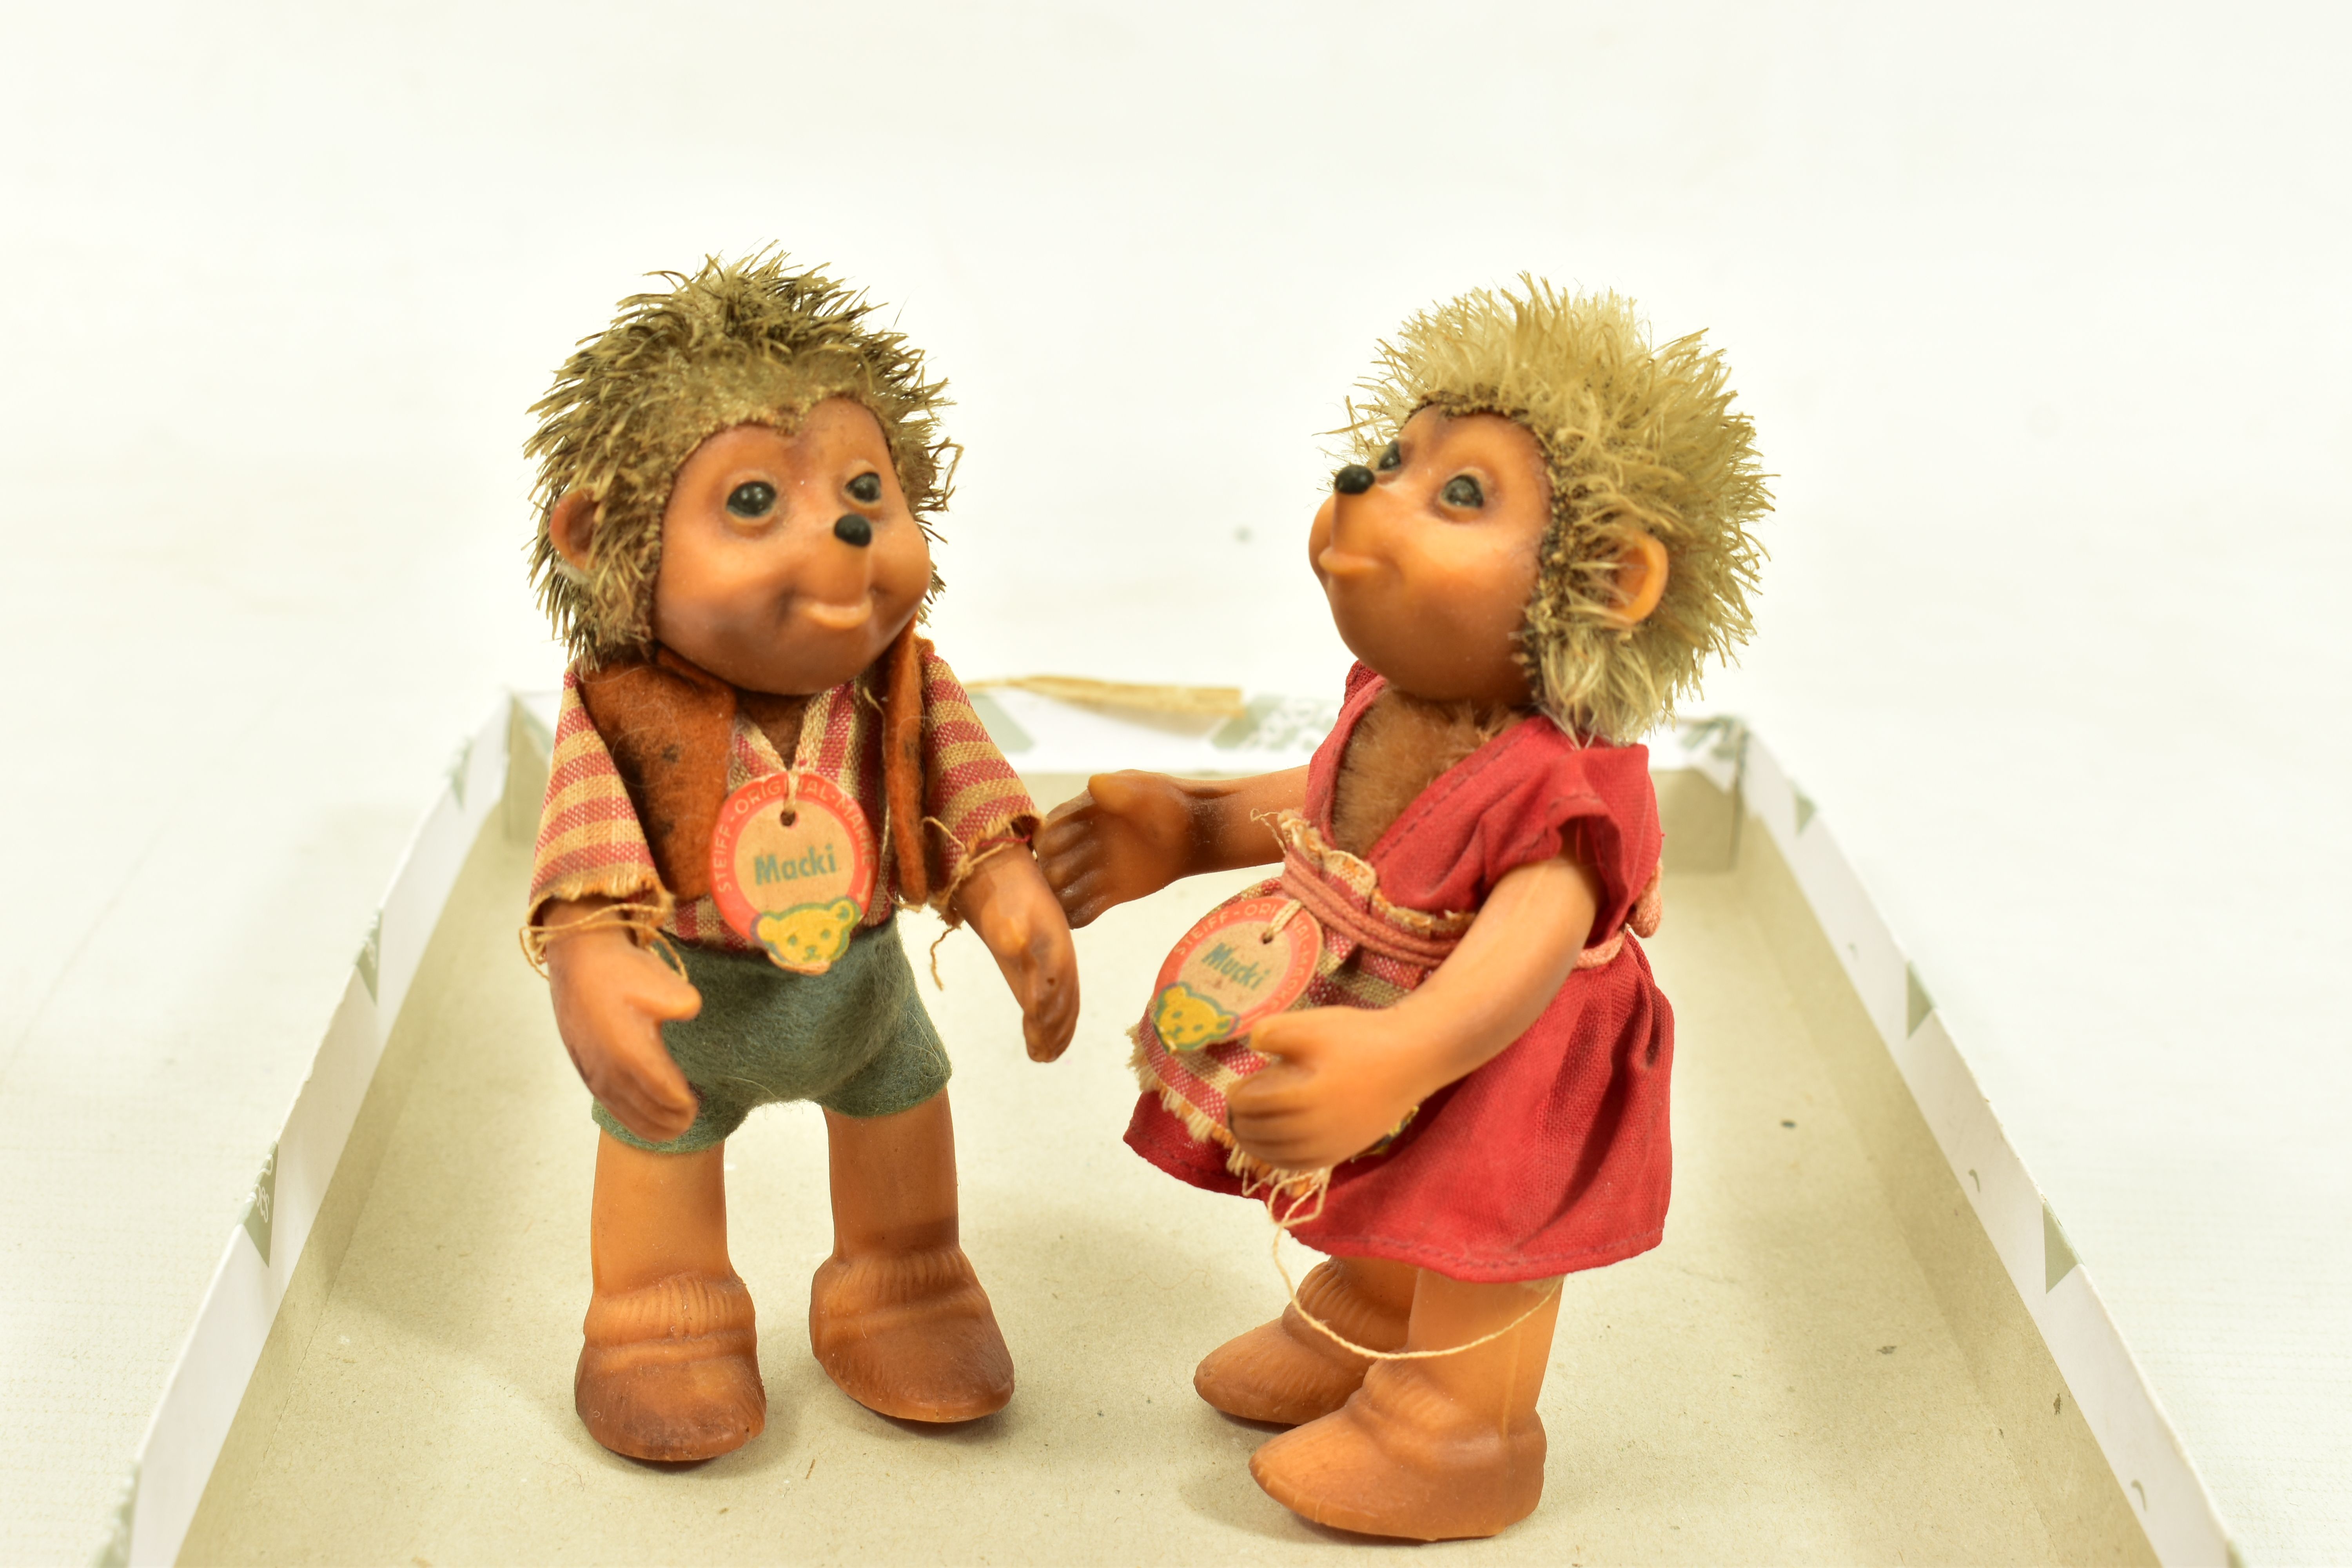 A PAIR OF VINTAGE STEIFF MUCKI AND MACKI HEDGEHOG FIGURES, both with swing tags, both appear